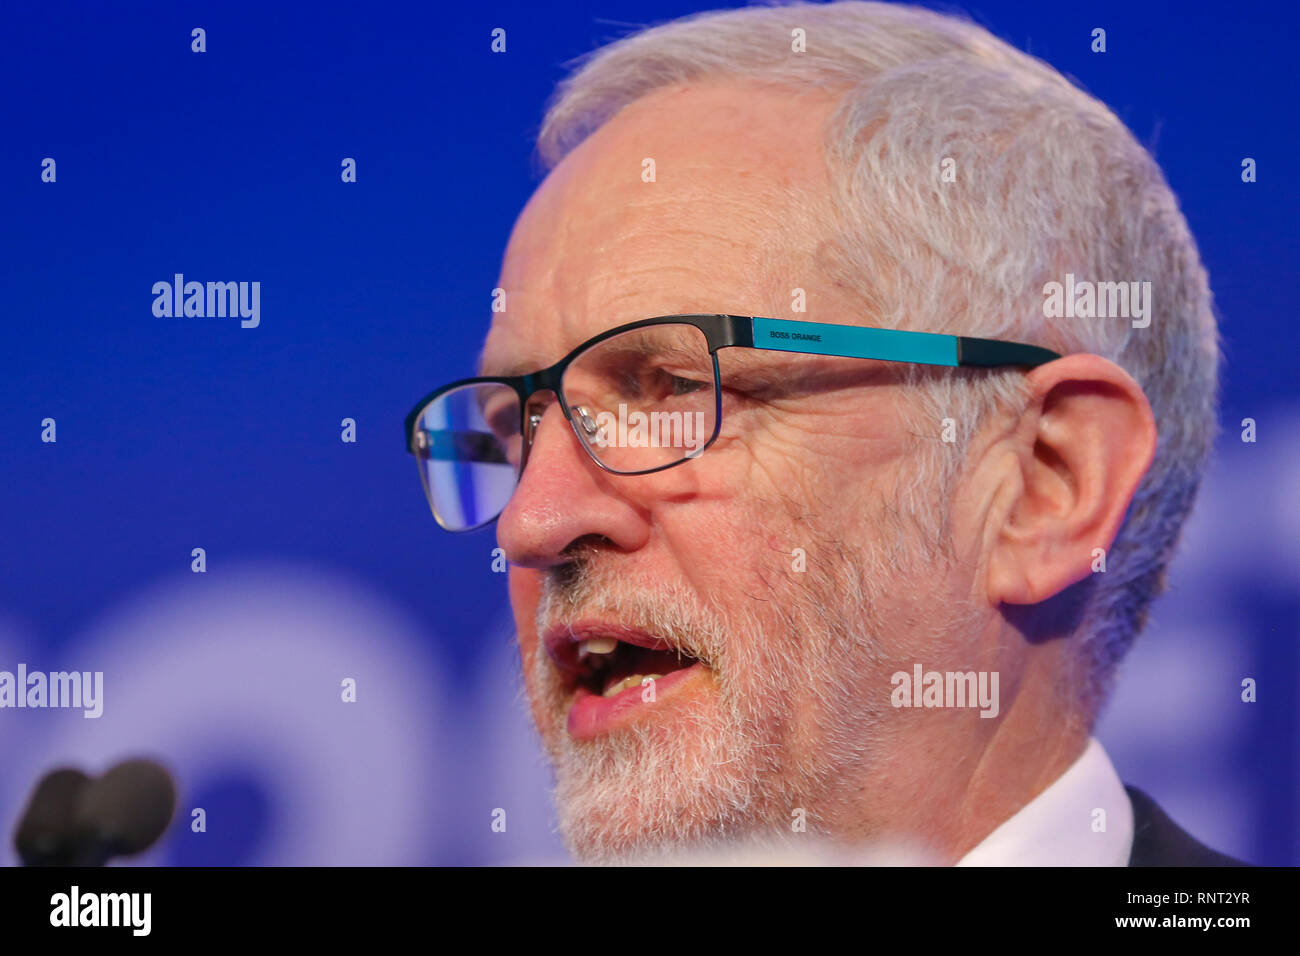 Jeremy Corbyn MP Leader of Labor Party is seen speaking during the 2019 National Manufacturing Conference in Queen Elizabeth II Center. The conference addresses the difficulties and challenges the manufacturing sector will face post-Brexit. Stock Photo